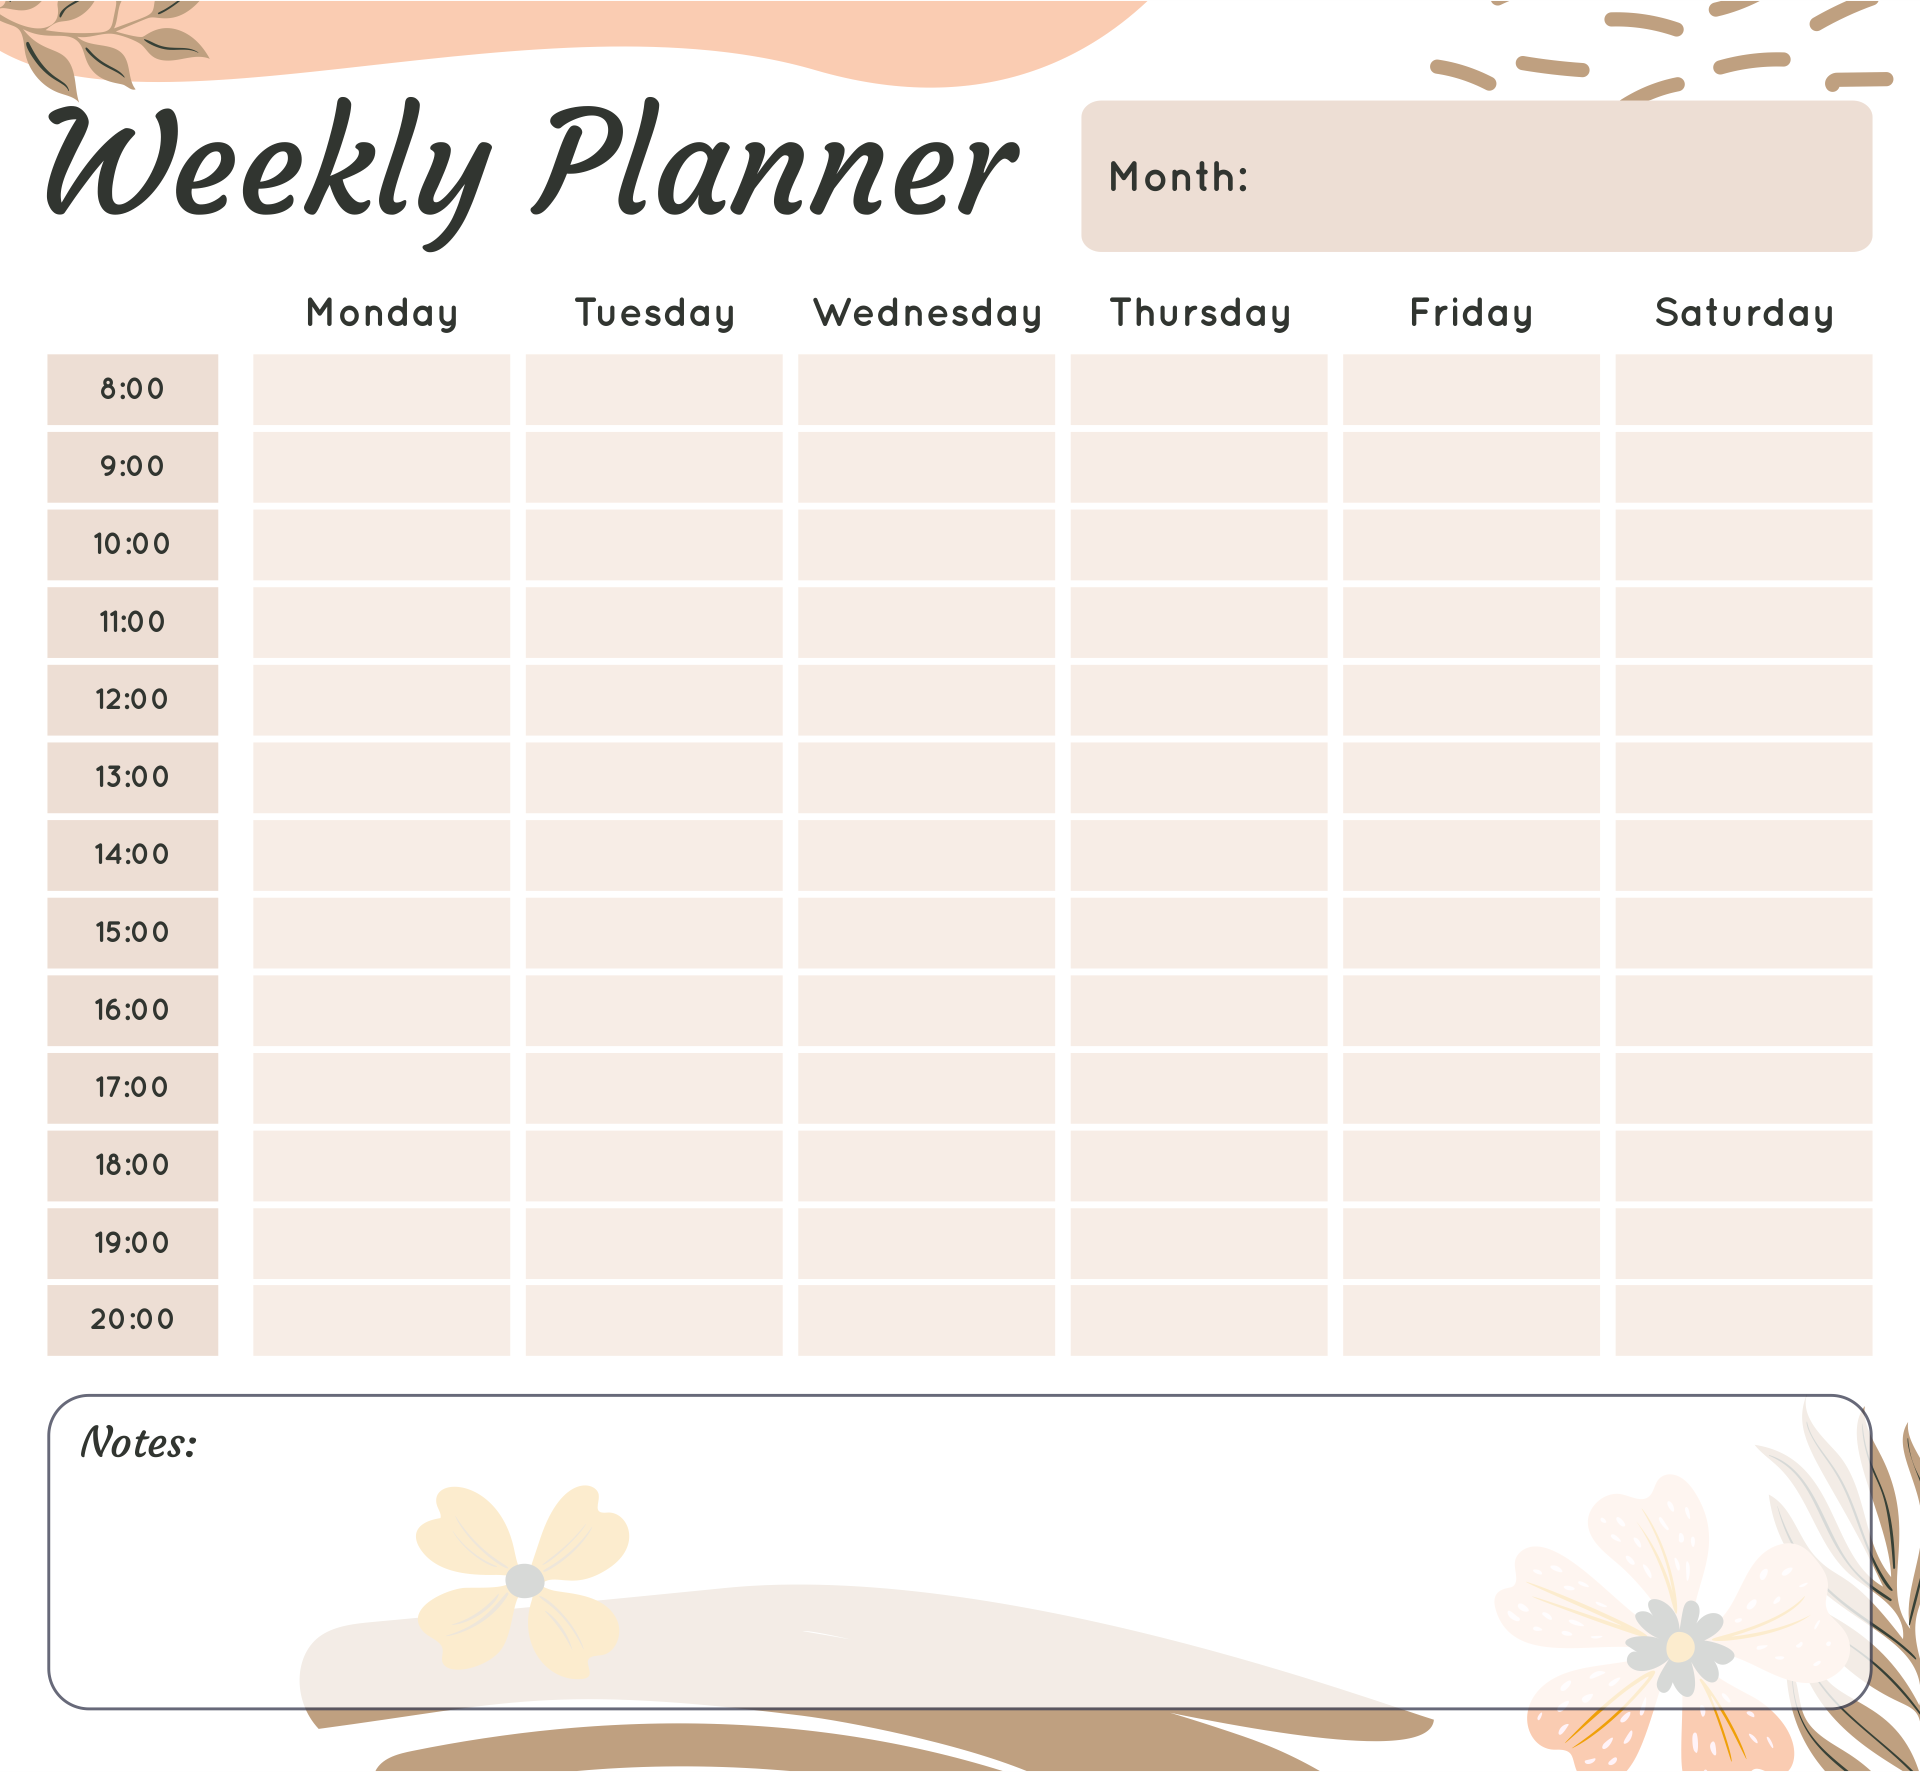 6-best-images-of-no-template-with-times-weekly-planner-printable